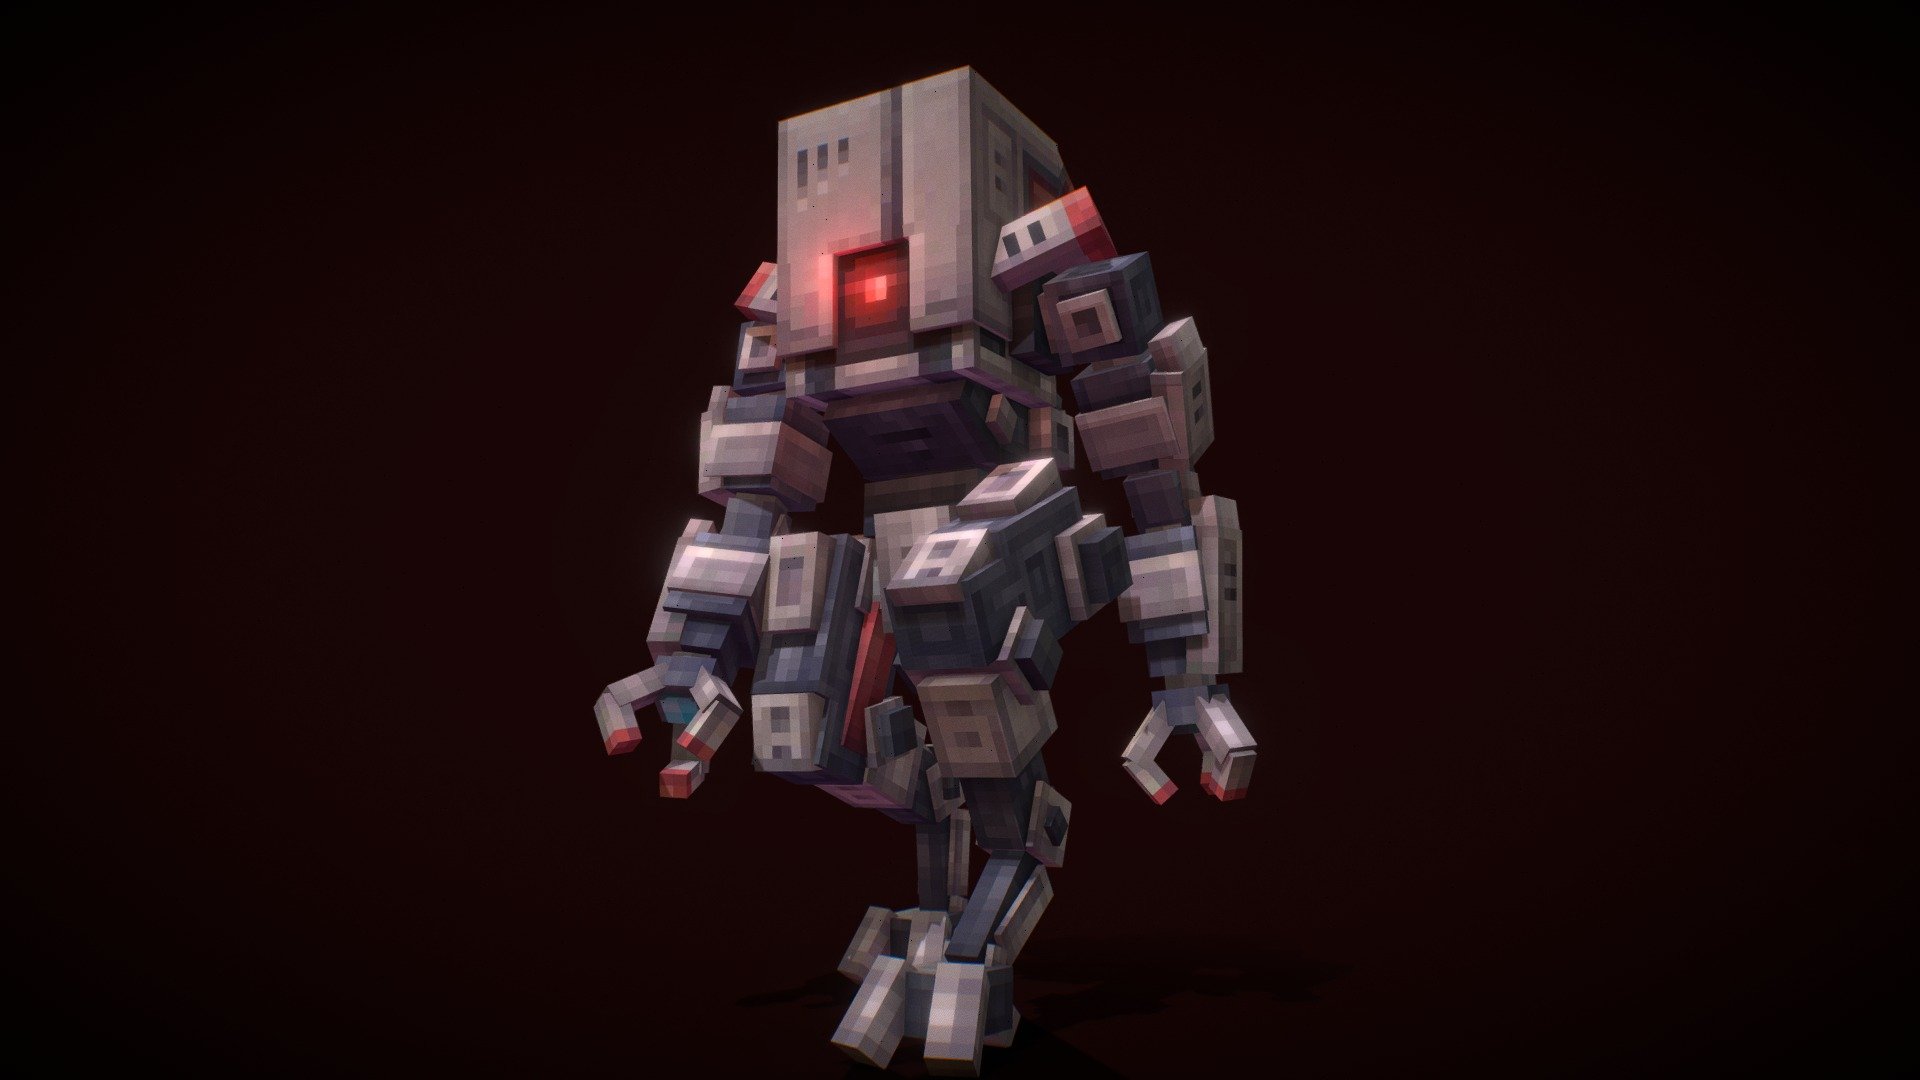 A military looking boss type robot made on blockbench for minecraft
by: Homegaddiel* - BlockBench " military tactical robot" - 3D model by homegaddiel 3d model